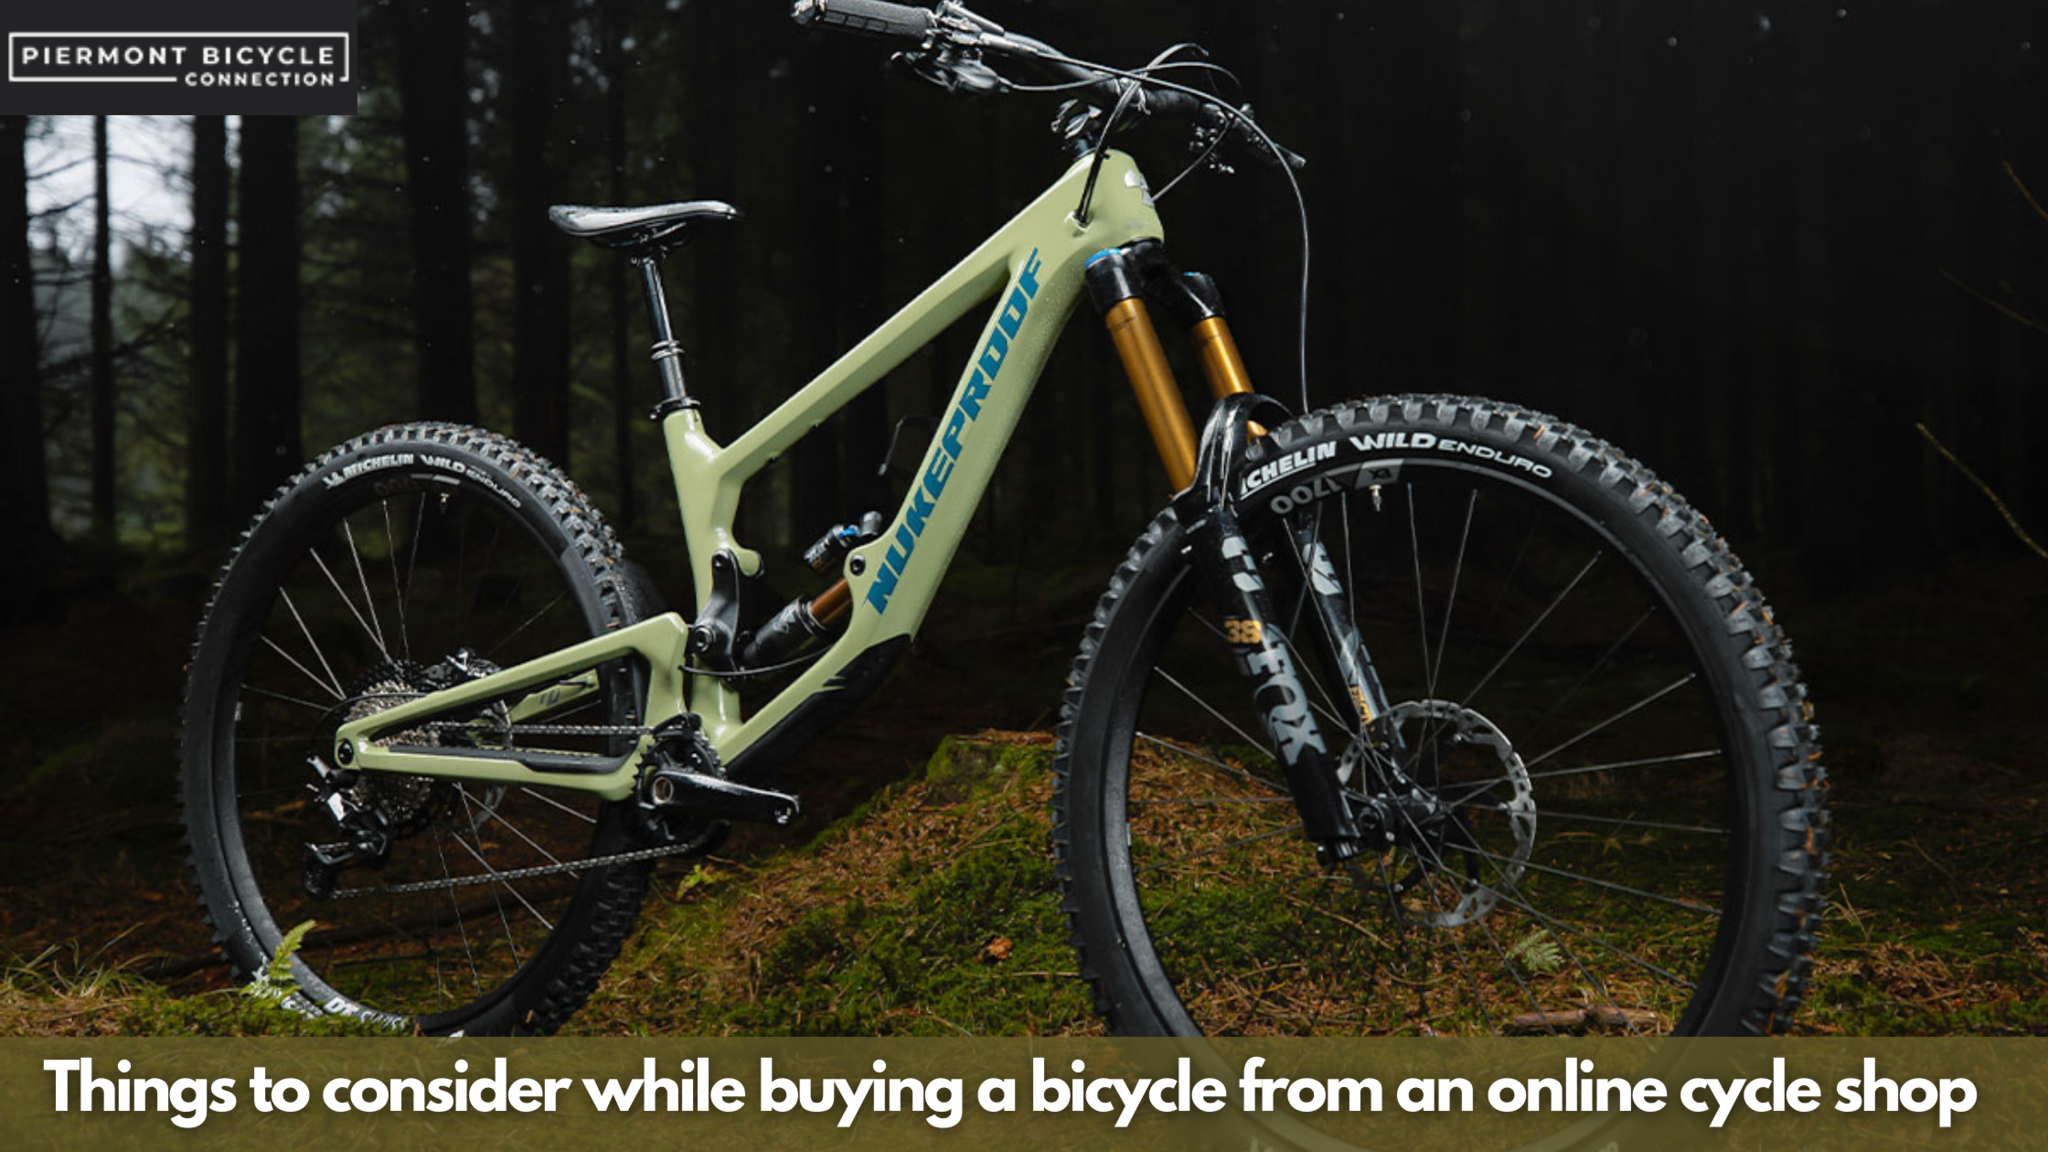 the online cycle shop